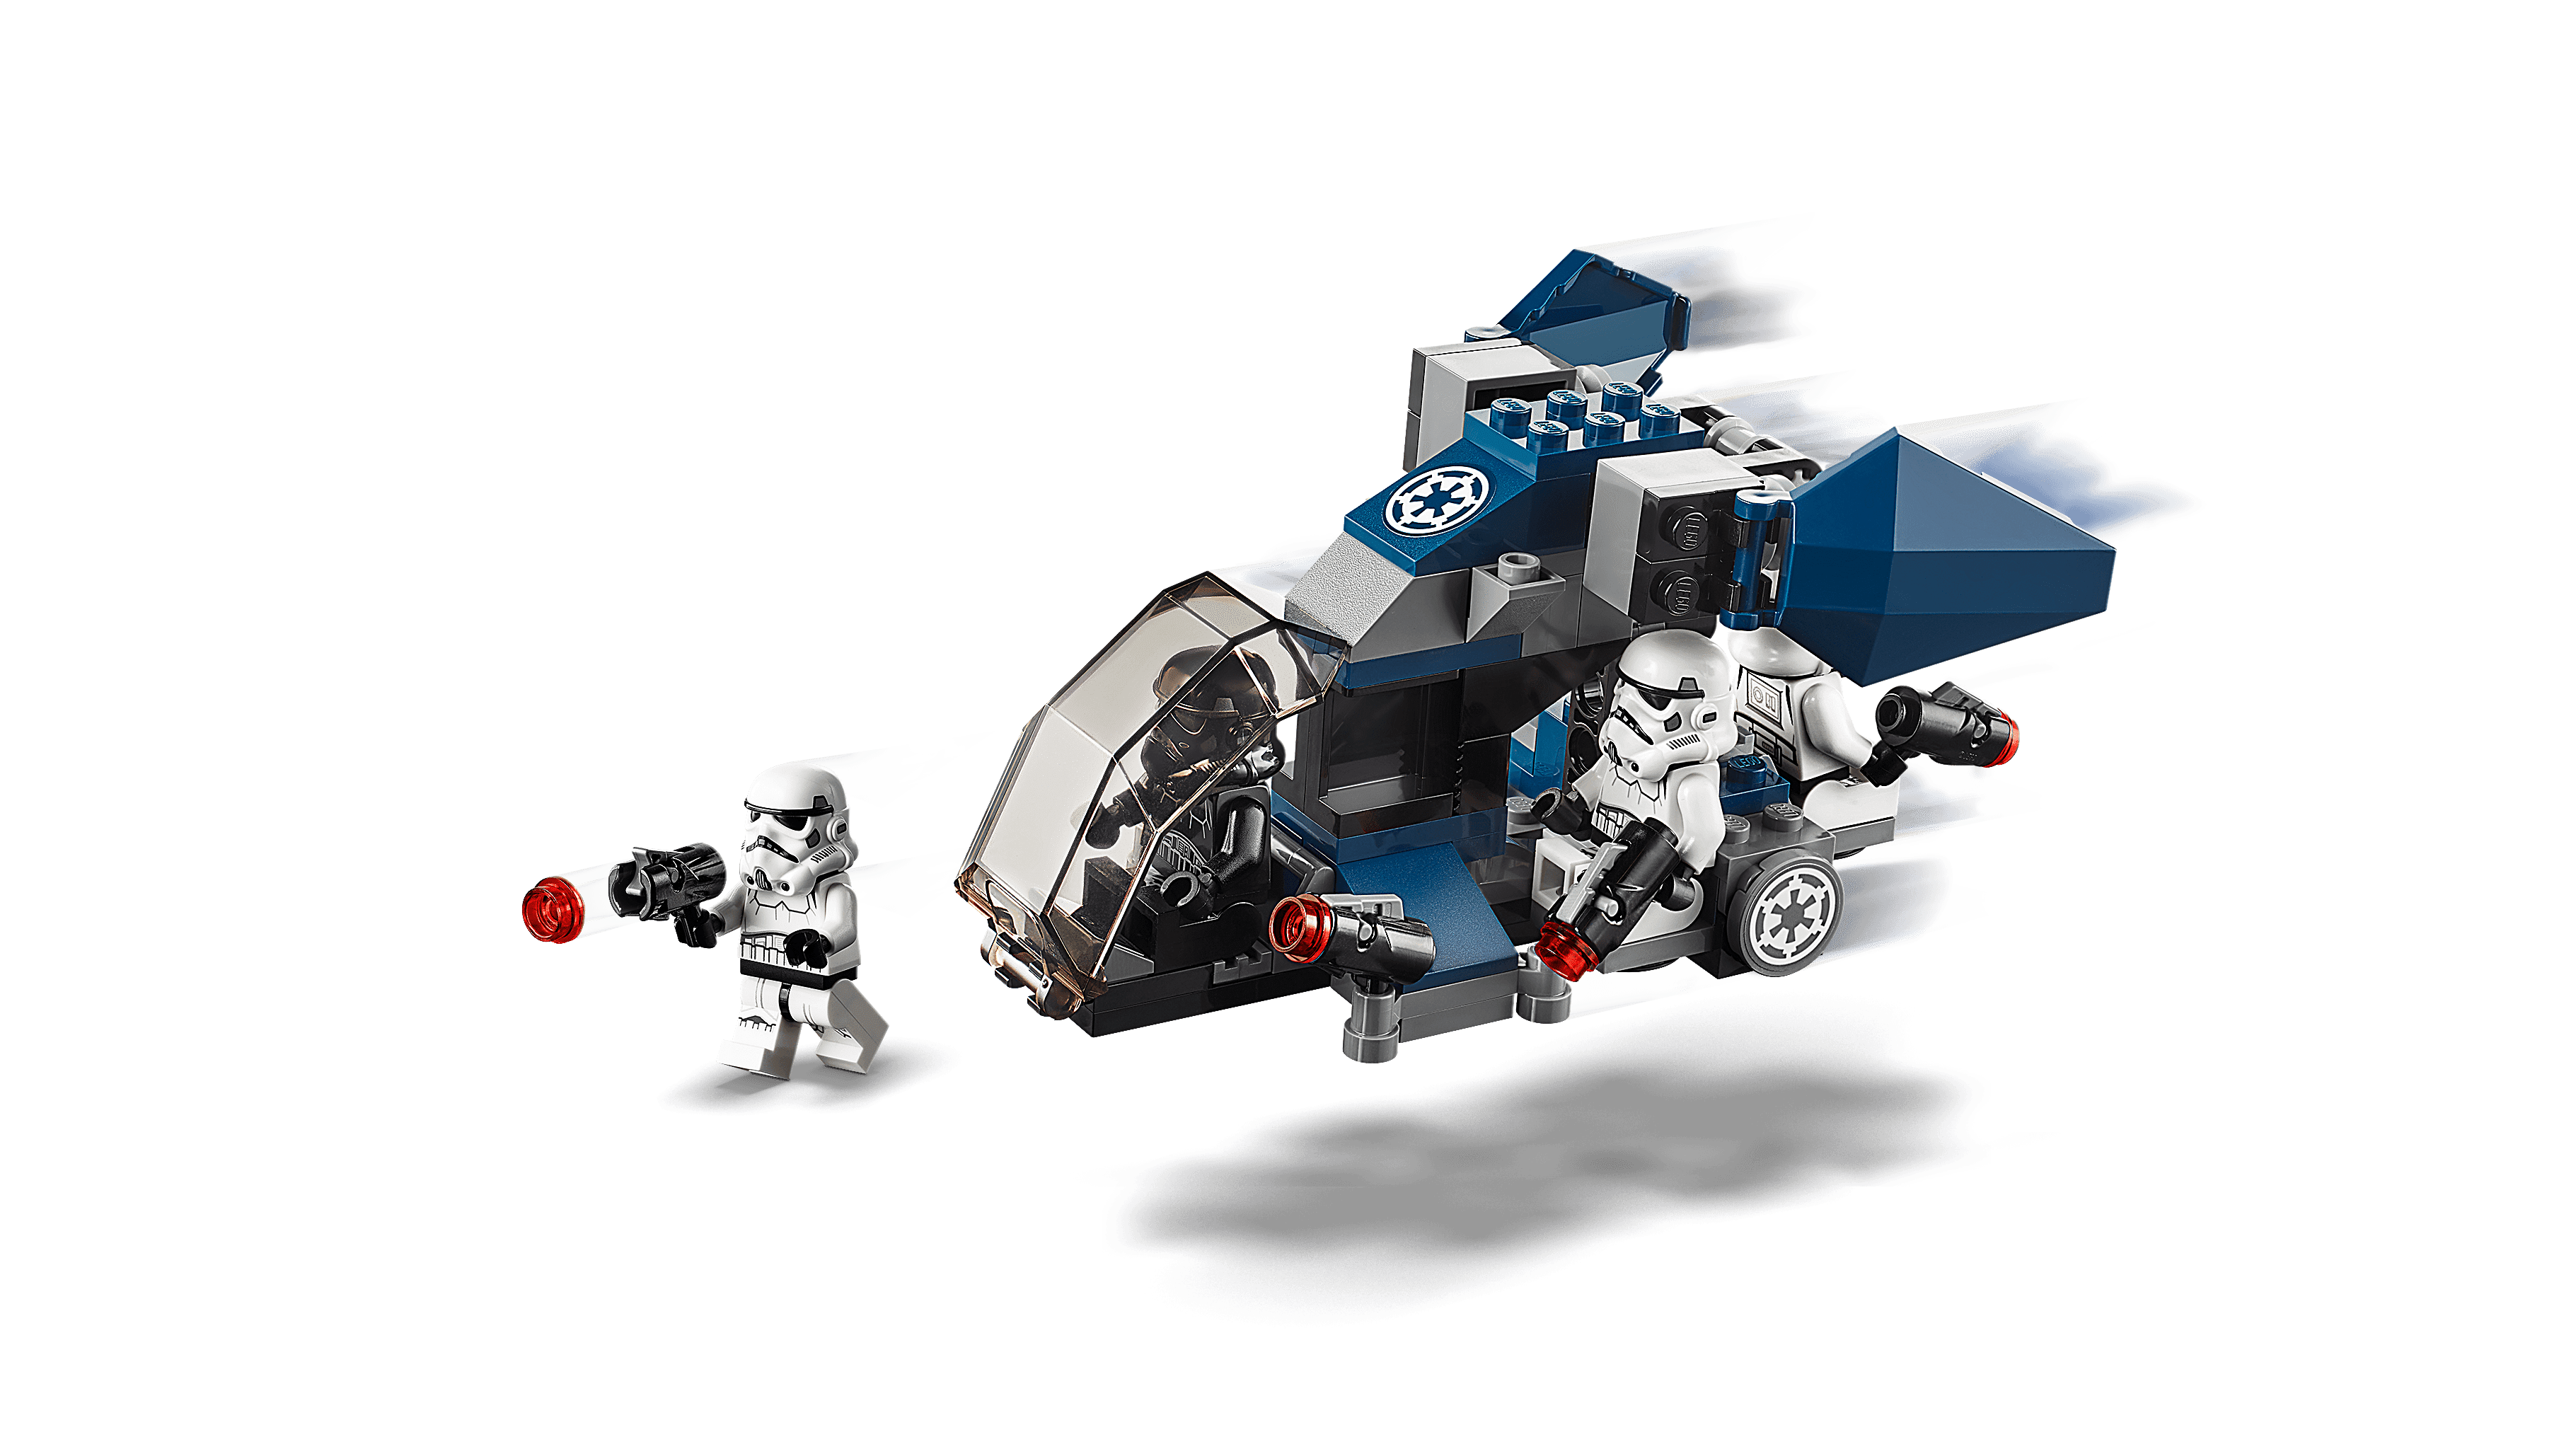 Manager Barnlig Forskelle LEGO Star Wars 20th Anniversary Edition Imperial Dropship 75262 -  Walmart.com